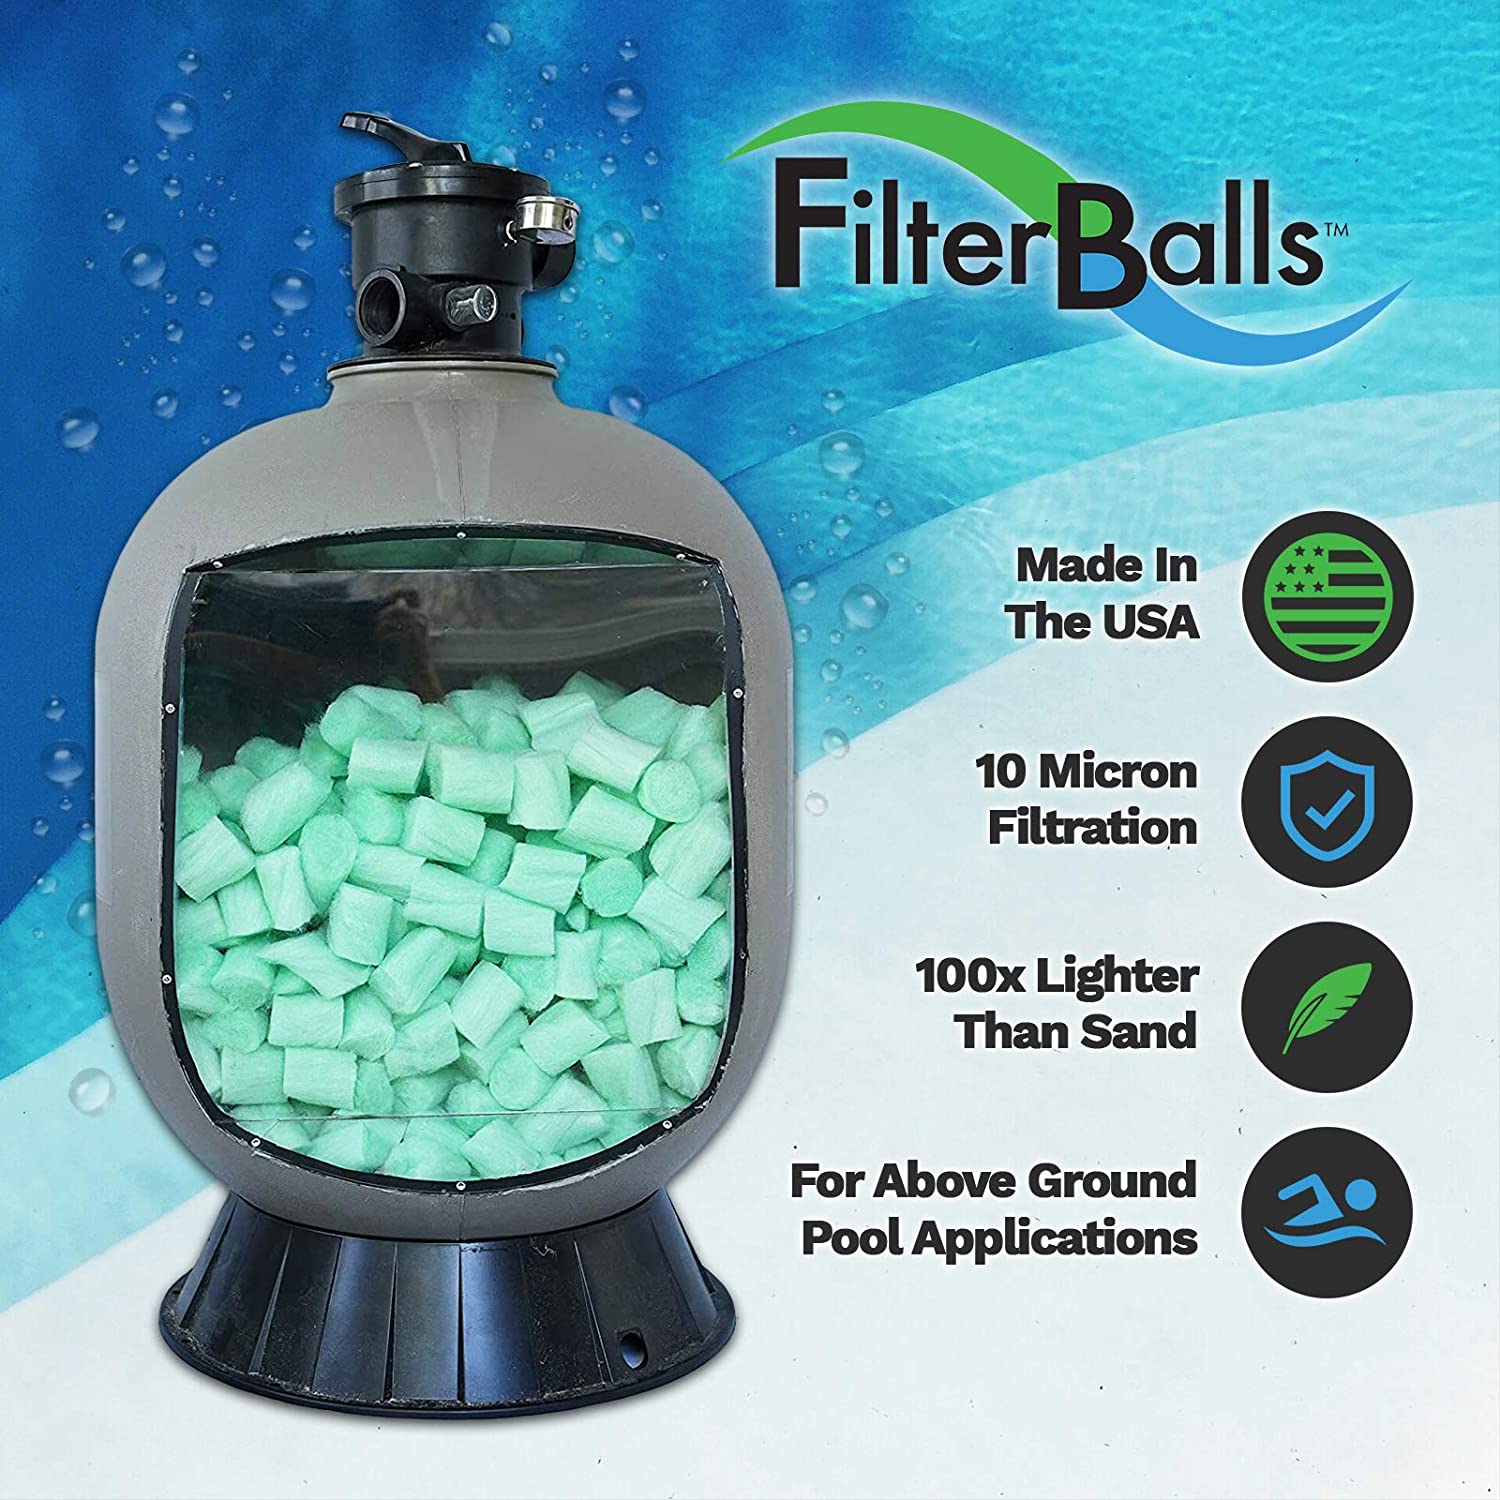 FilterBalls Filter Balls Pool Pool the System Systems department Filter at in Filter